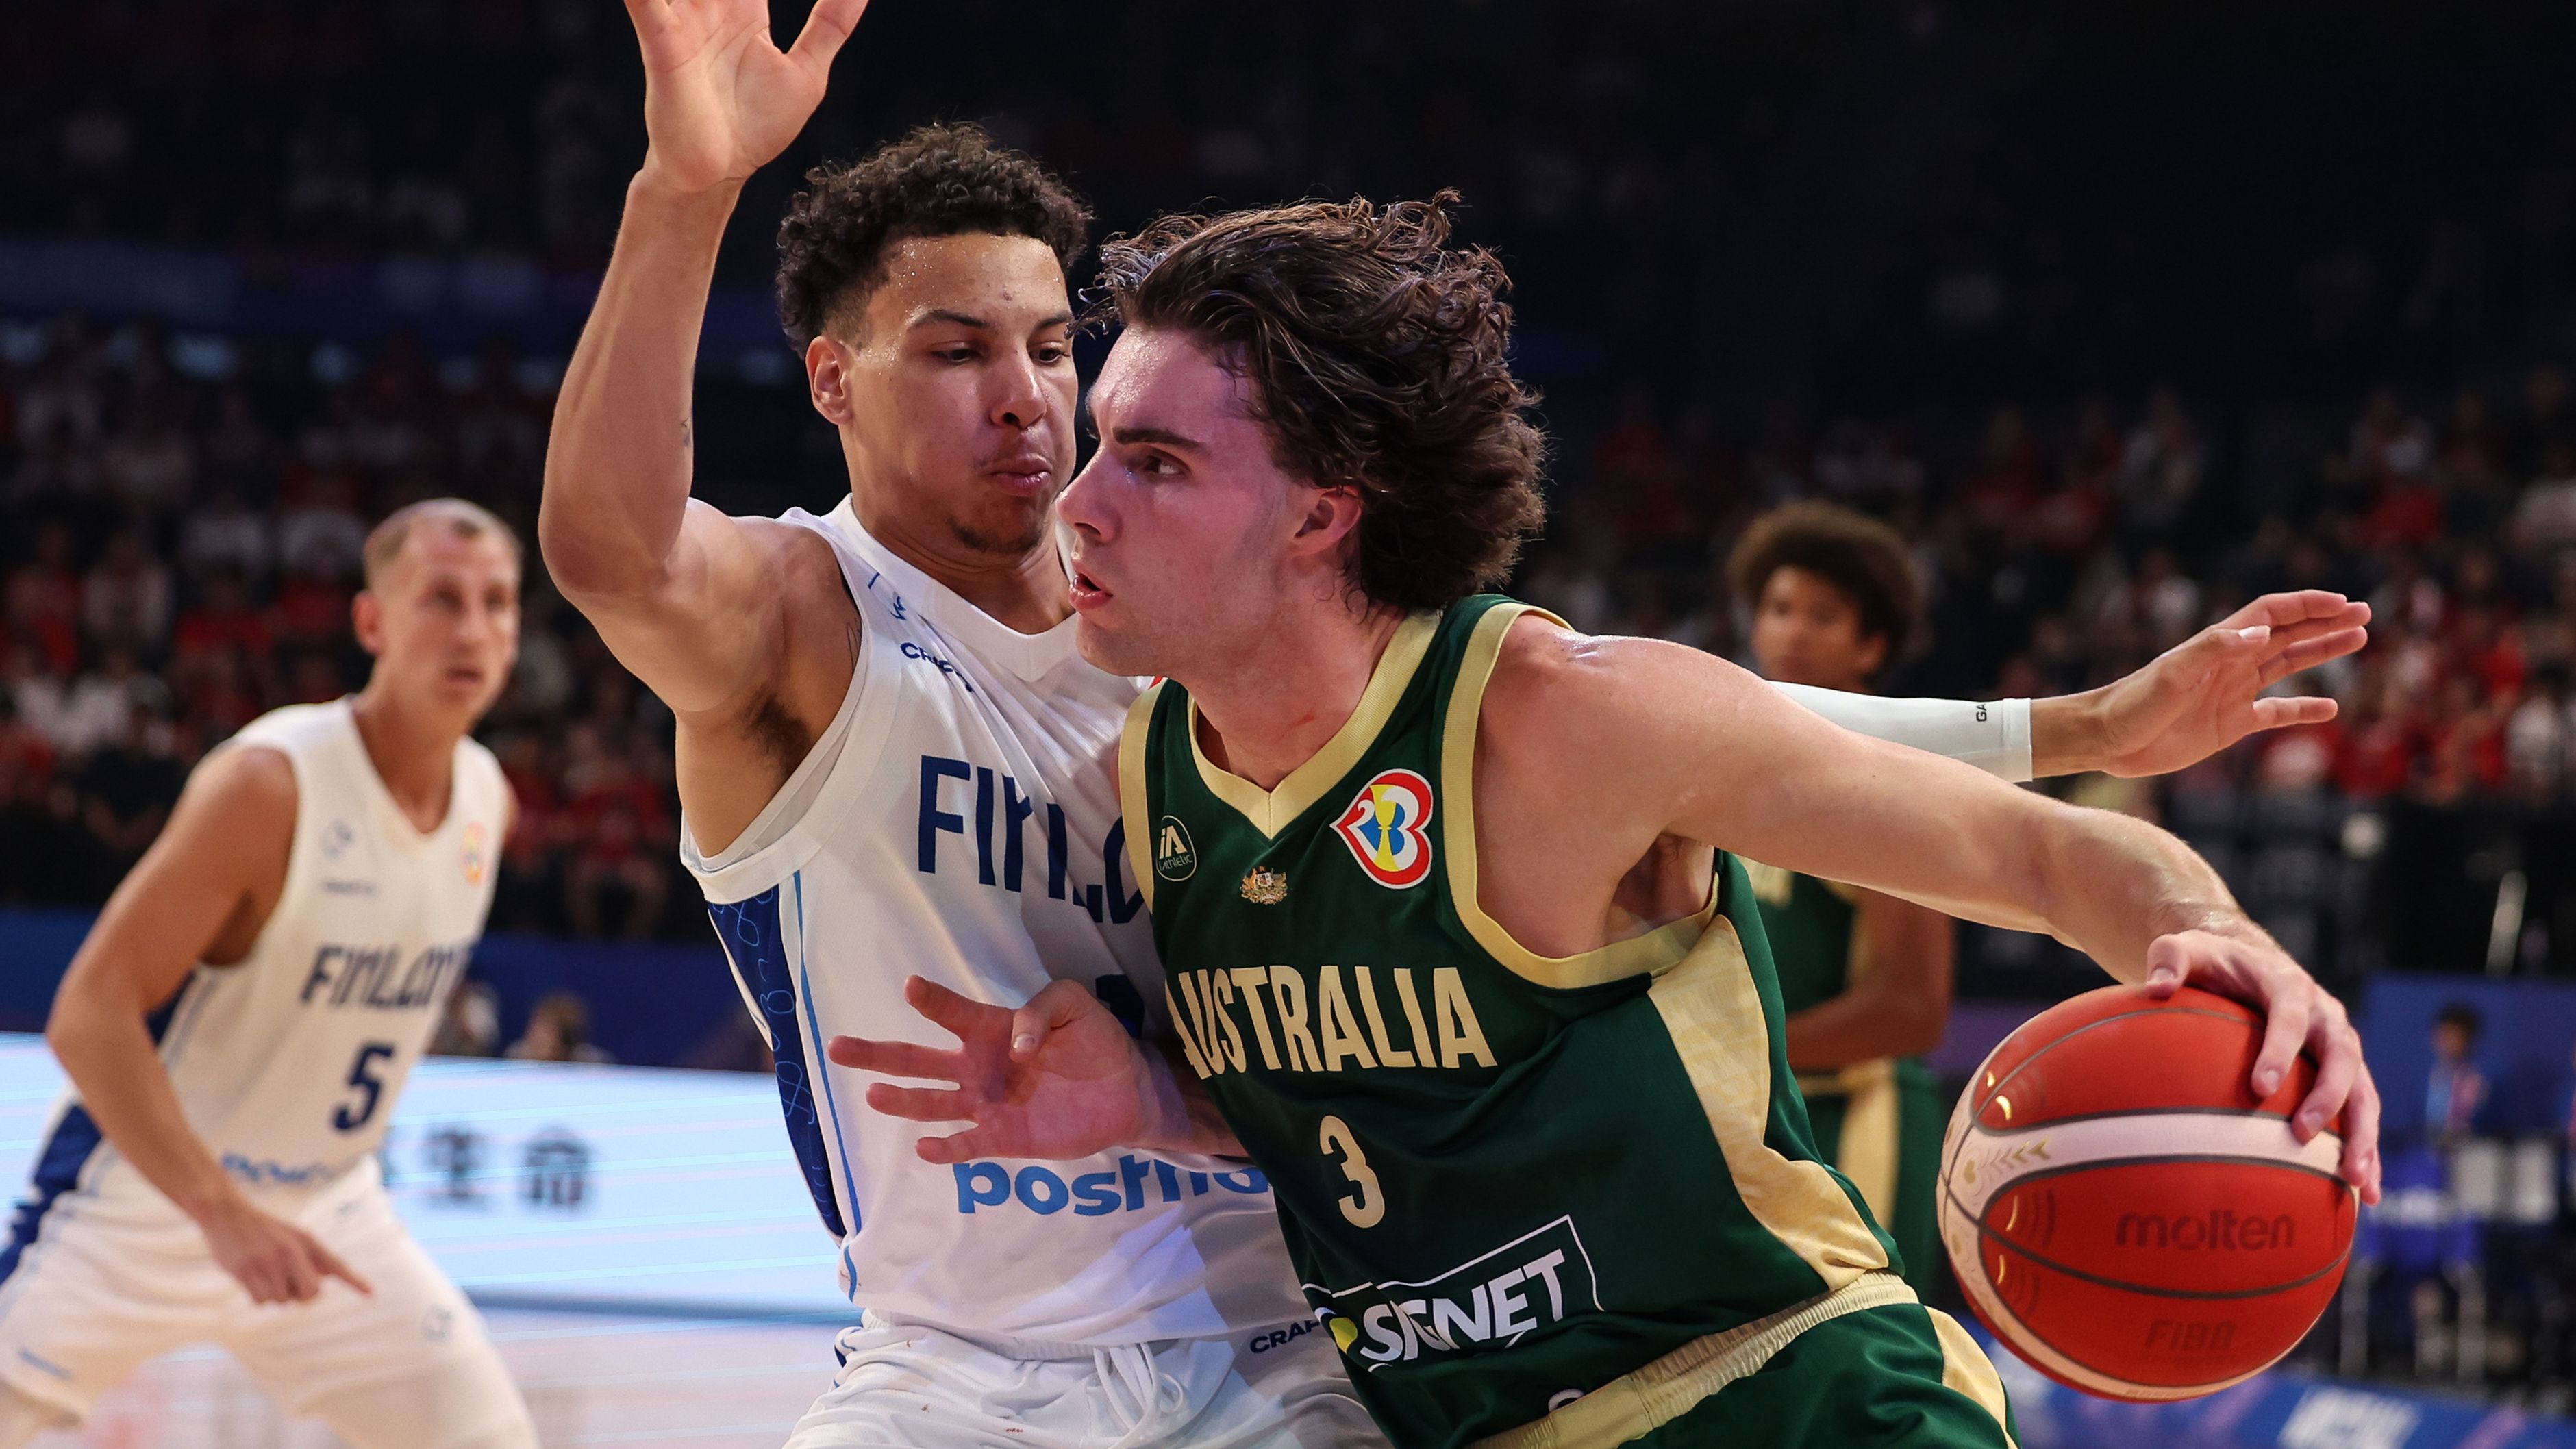 OKINAWA, JAPAN - AUGUST 25: Josh Giddey #3 of Australia drives to the basket against Miro Little #1 of Finland during the FIBA World Cup Group E game between Finland and Australia at Okinawa Arena on August 25, 2023 in Okinawa, Japan. (Photo by Takashi Aoyama/Getty Images)